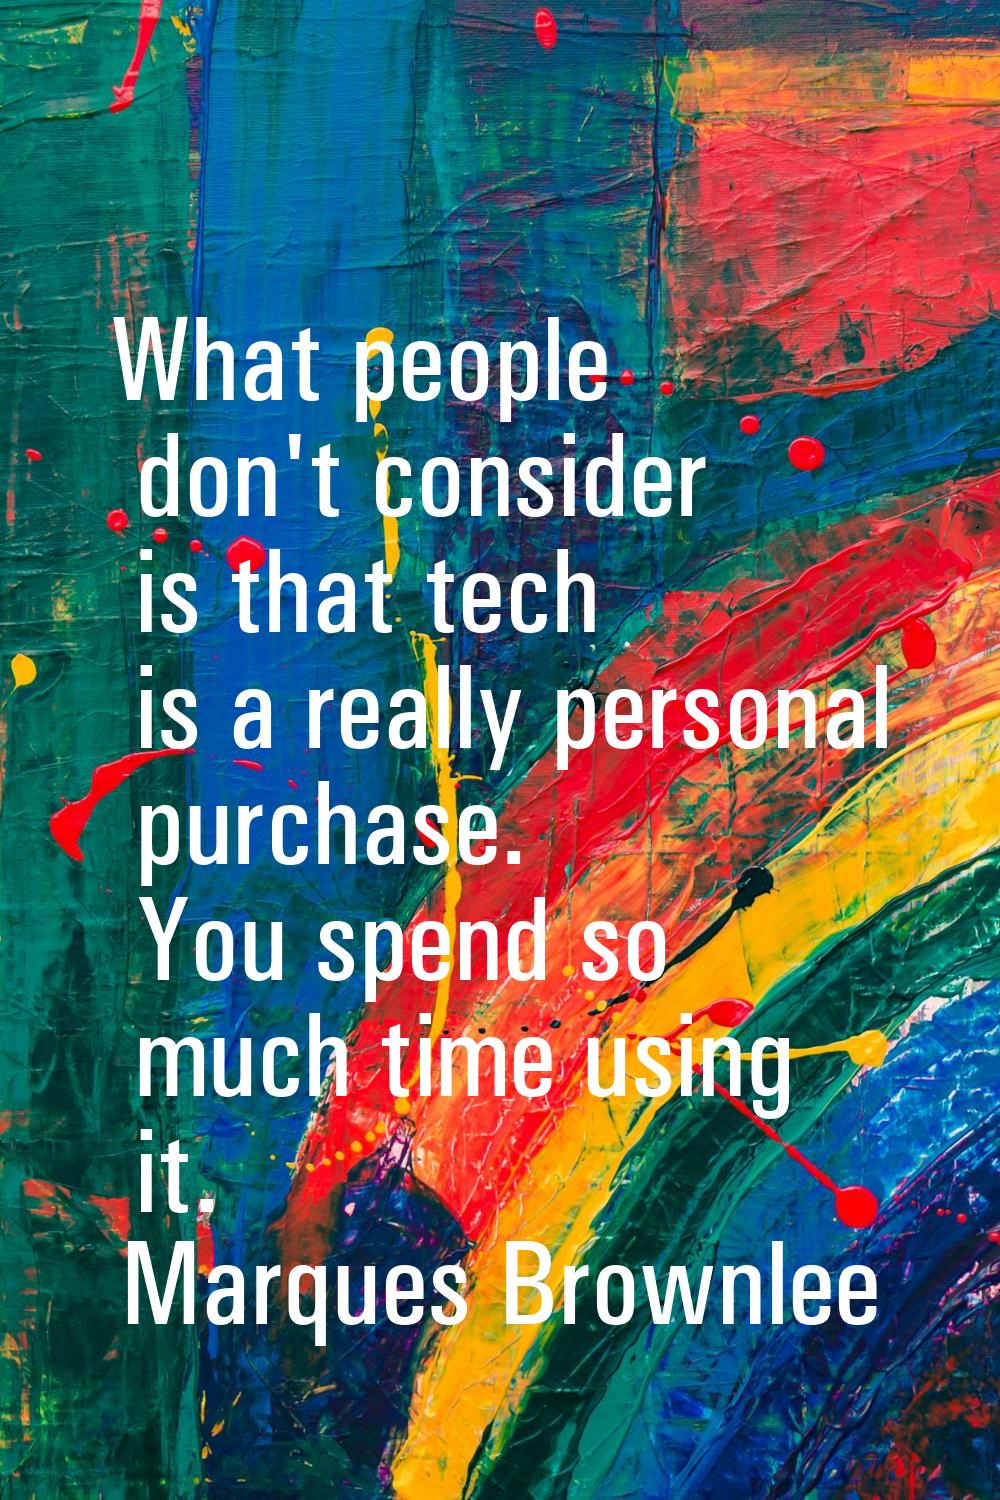 What people don't consider is that tech is a really personal purchase. You spend so much time using